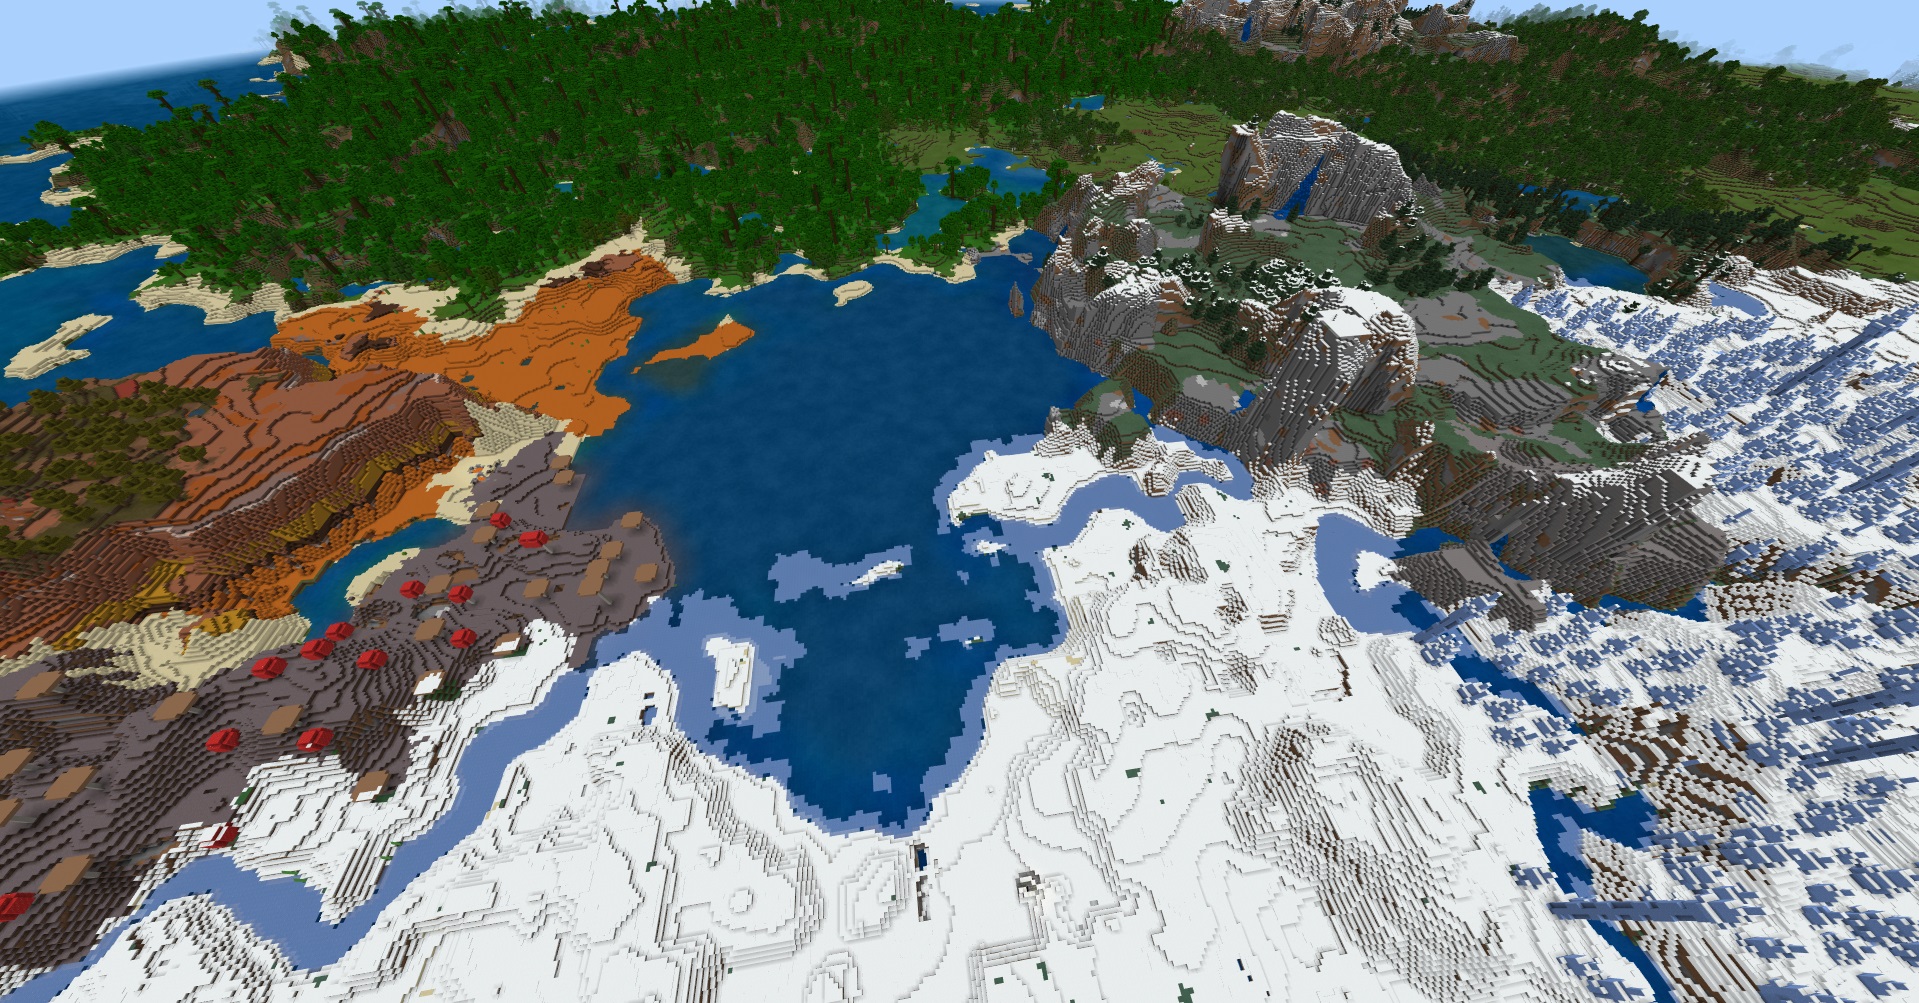 Minecraft Bedrock Pocket Edition seed - An overhead view of a tiny ocean surrounded by a mushroom biome, ice spikes, a jungle, badlands, tundra, mountains, and more